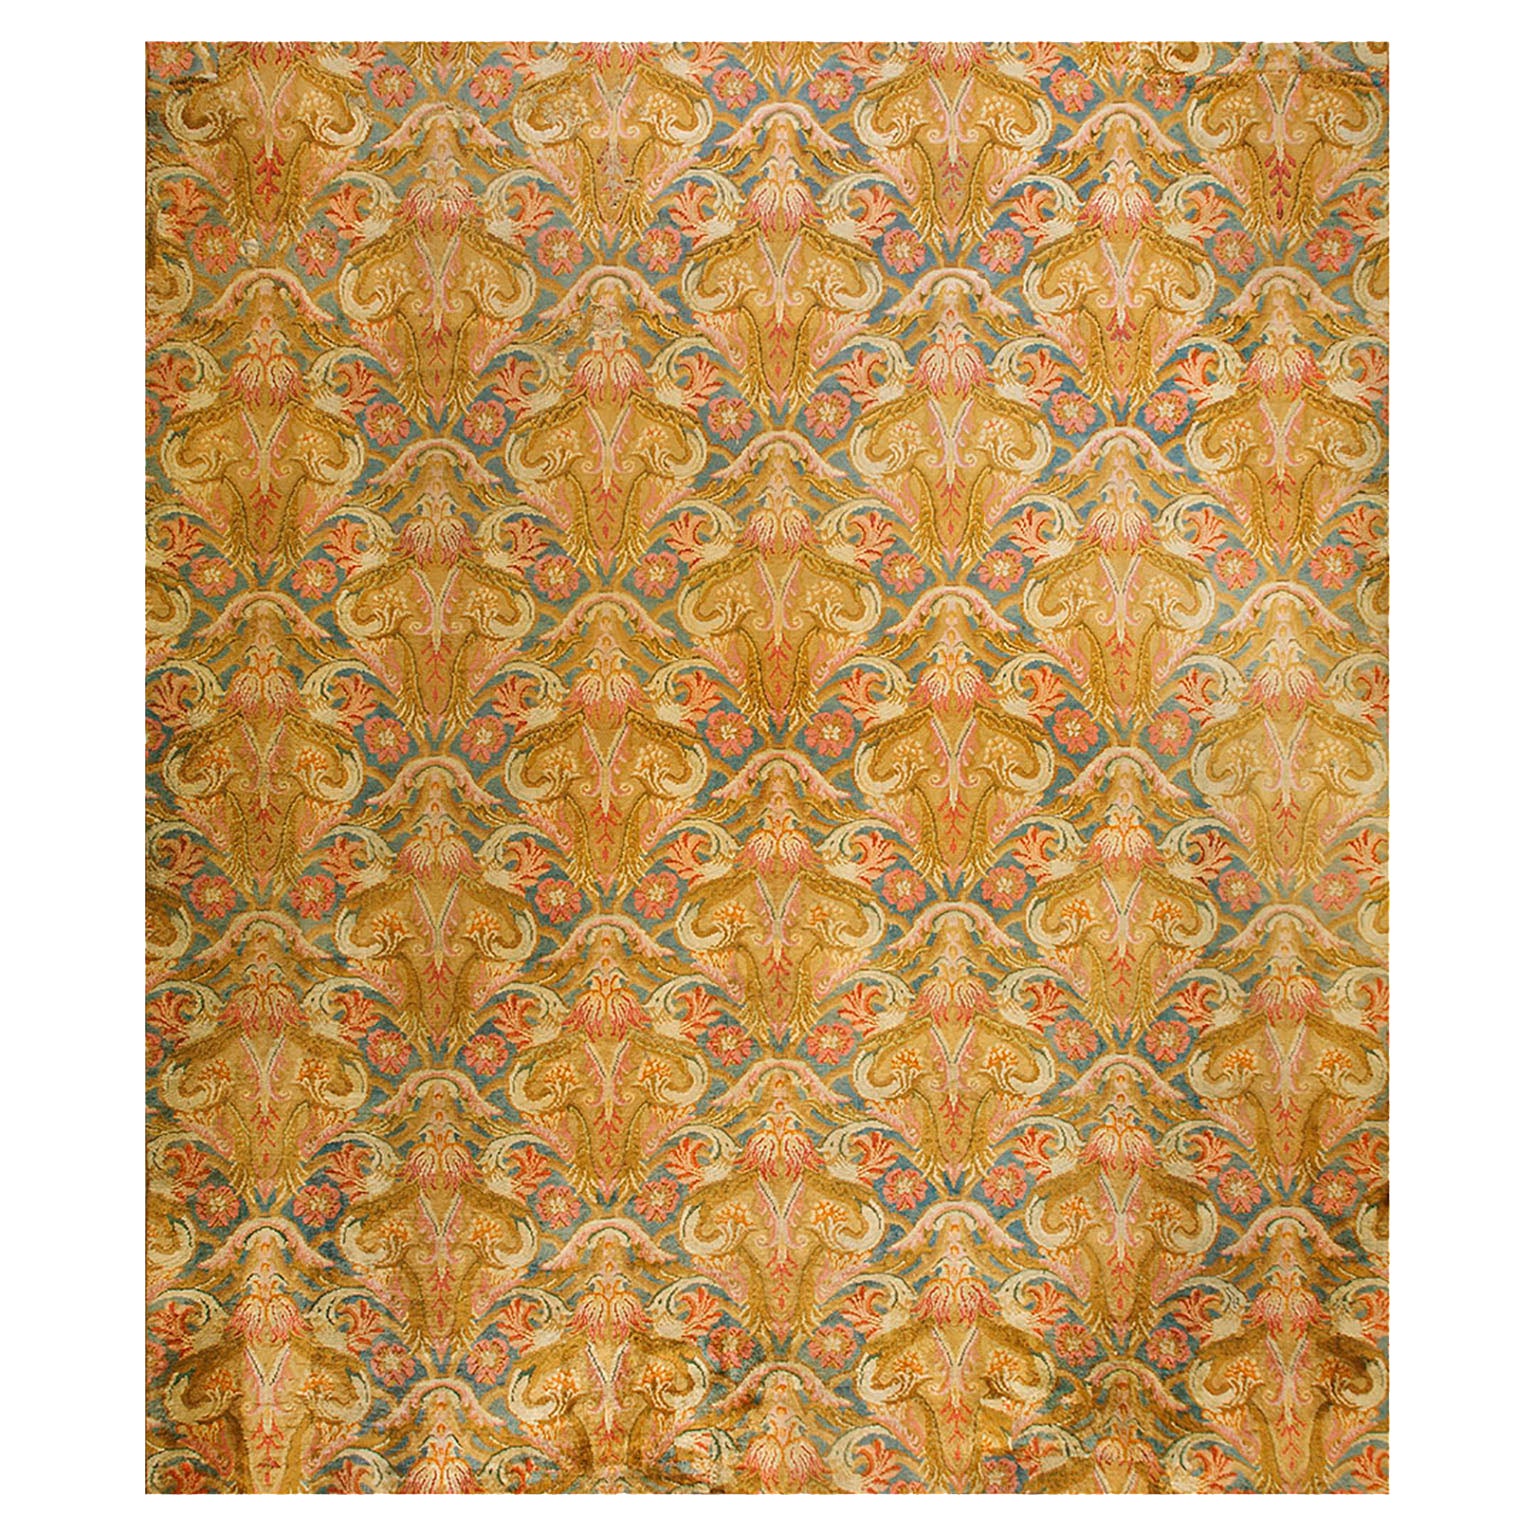 Mid 18th Century English Axminster Carpet ( 13'8" x 15'8" - 417 x 478 ) For Sale